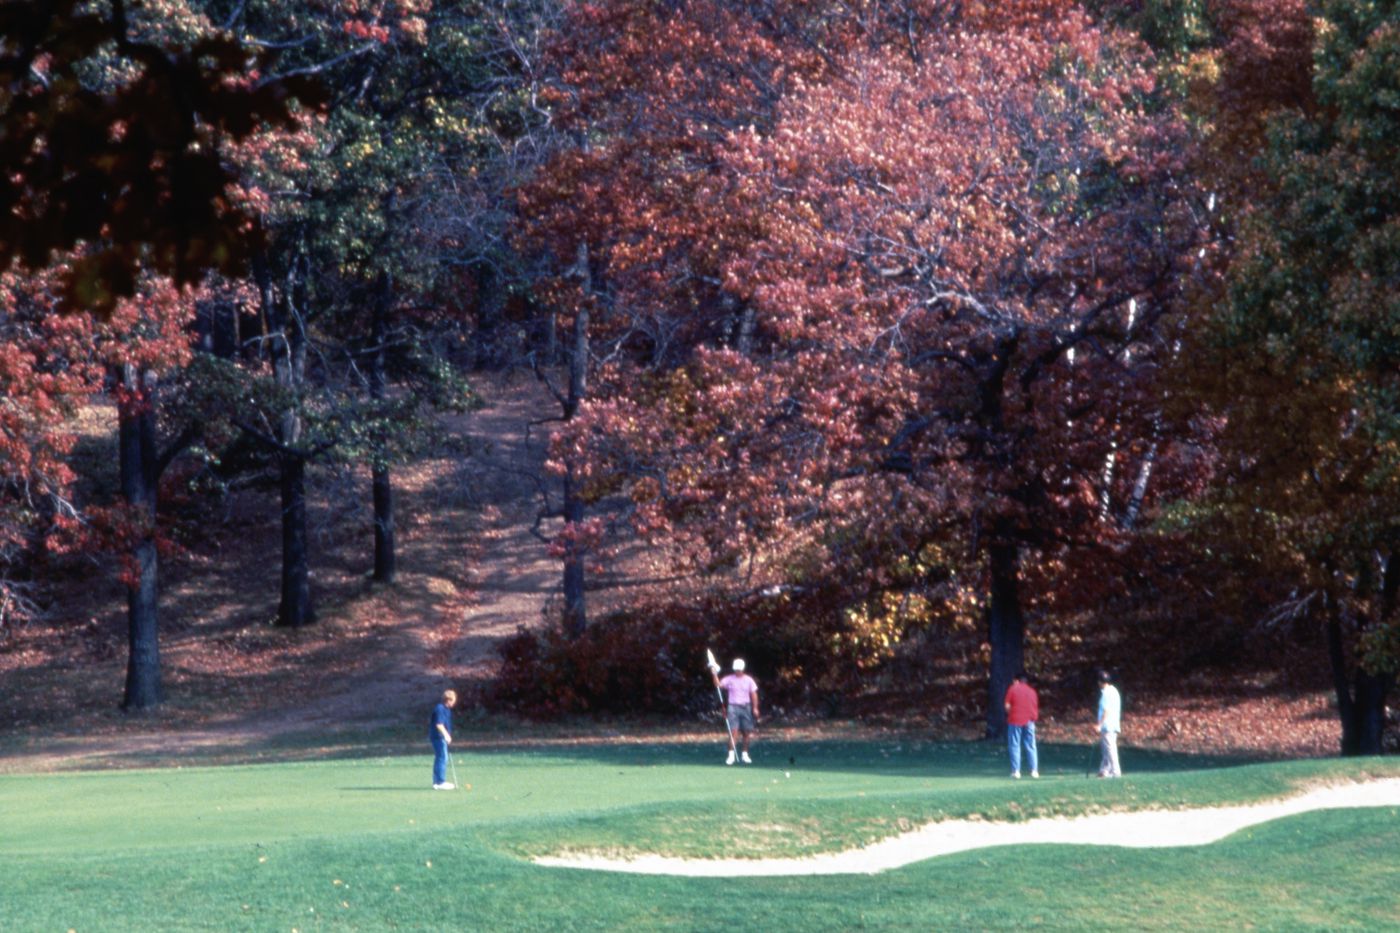 Photograph of people golfing for research for Olmsted: L'origine del parco urbano e del parco naturale contemporaneo